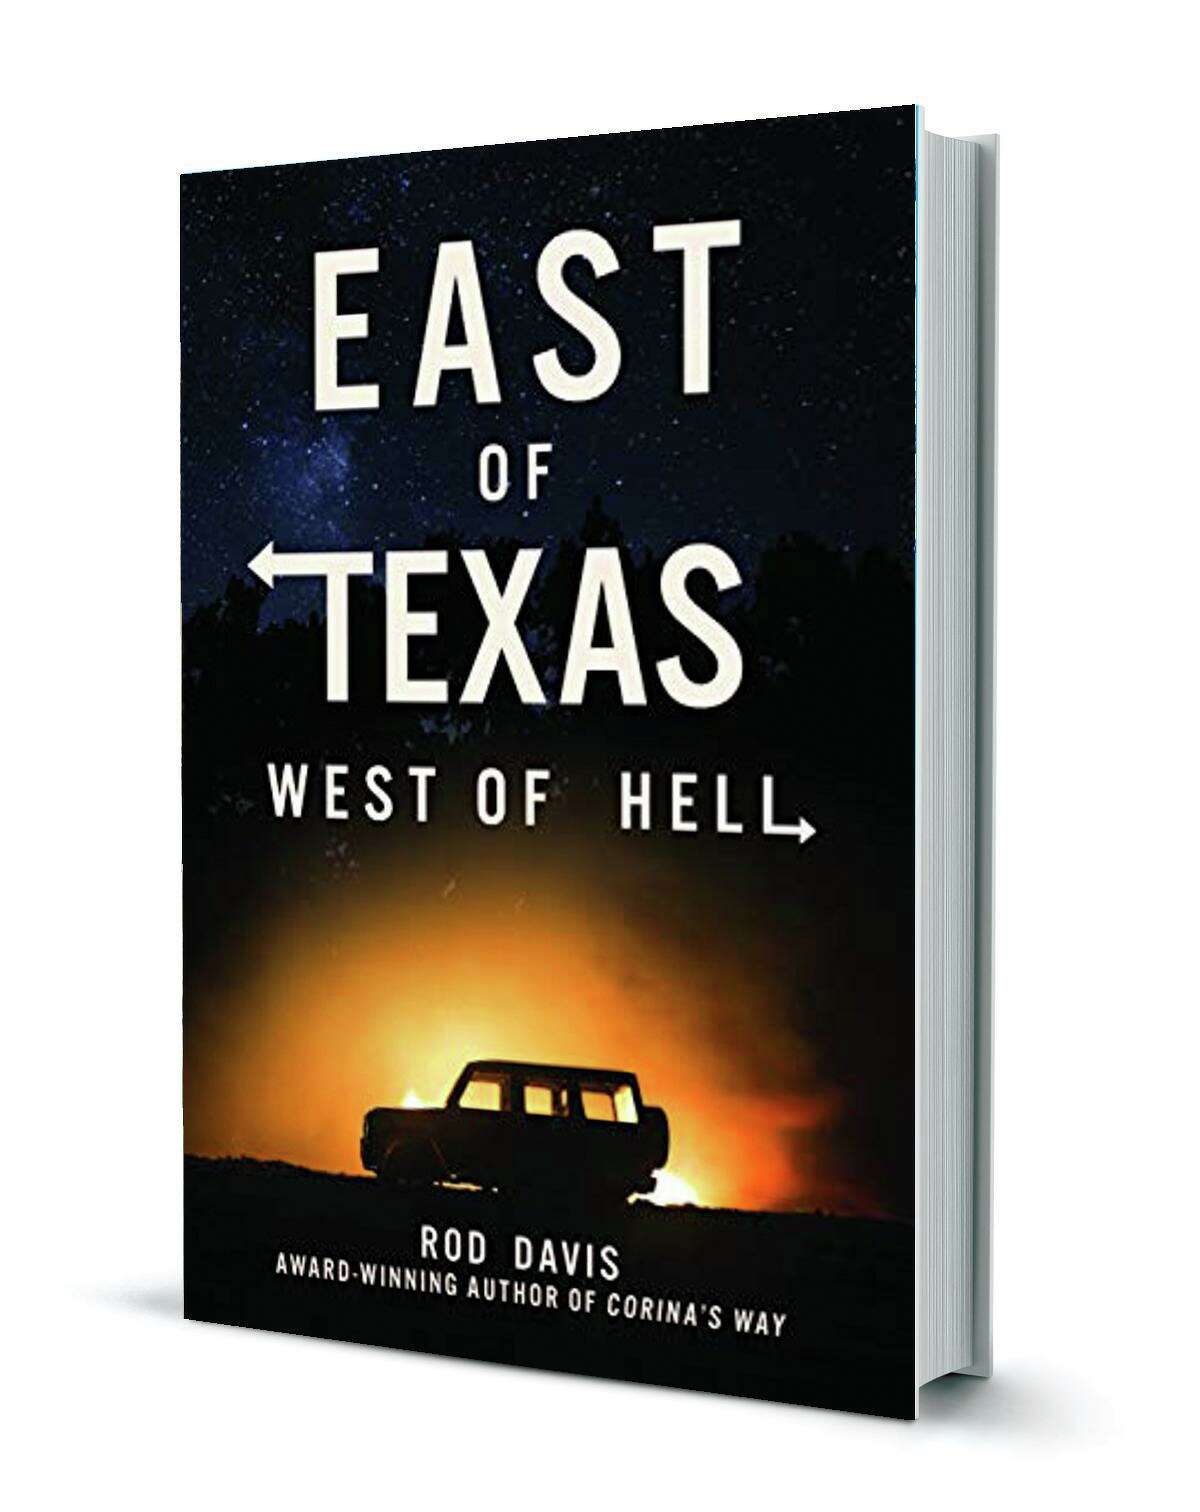 “East of Texas, West of Hell”